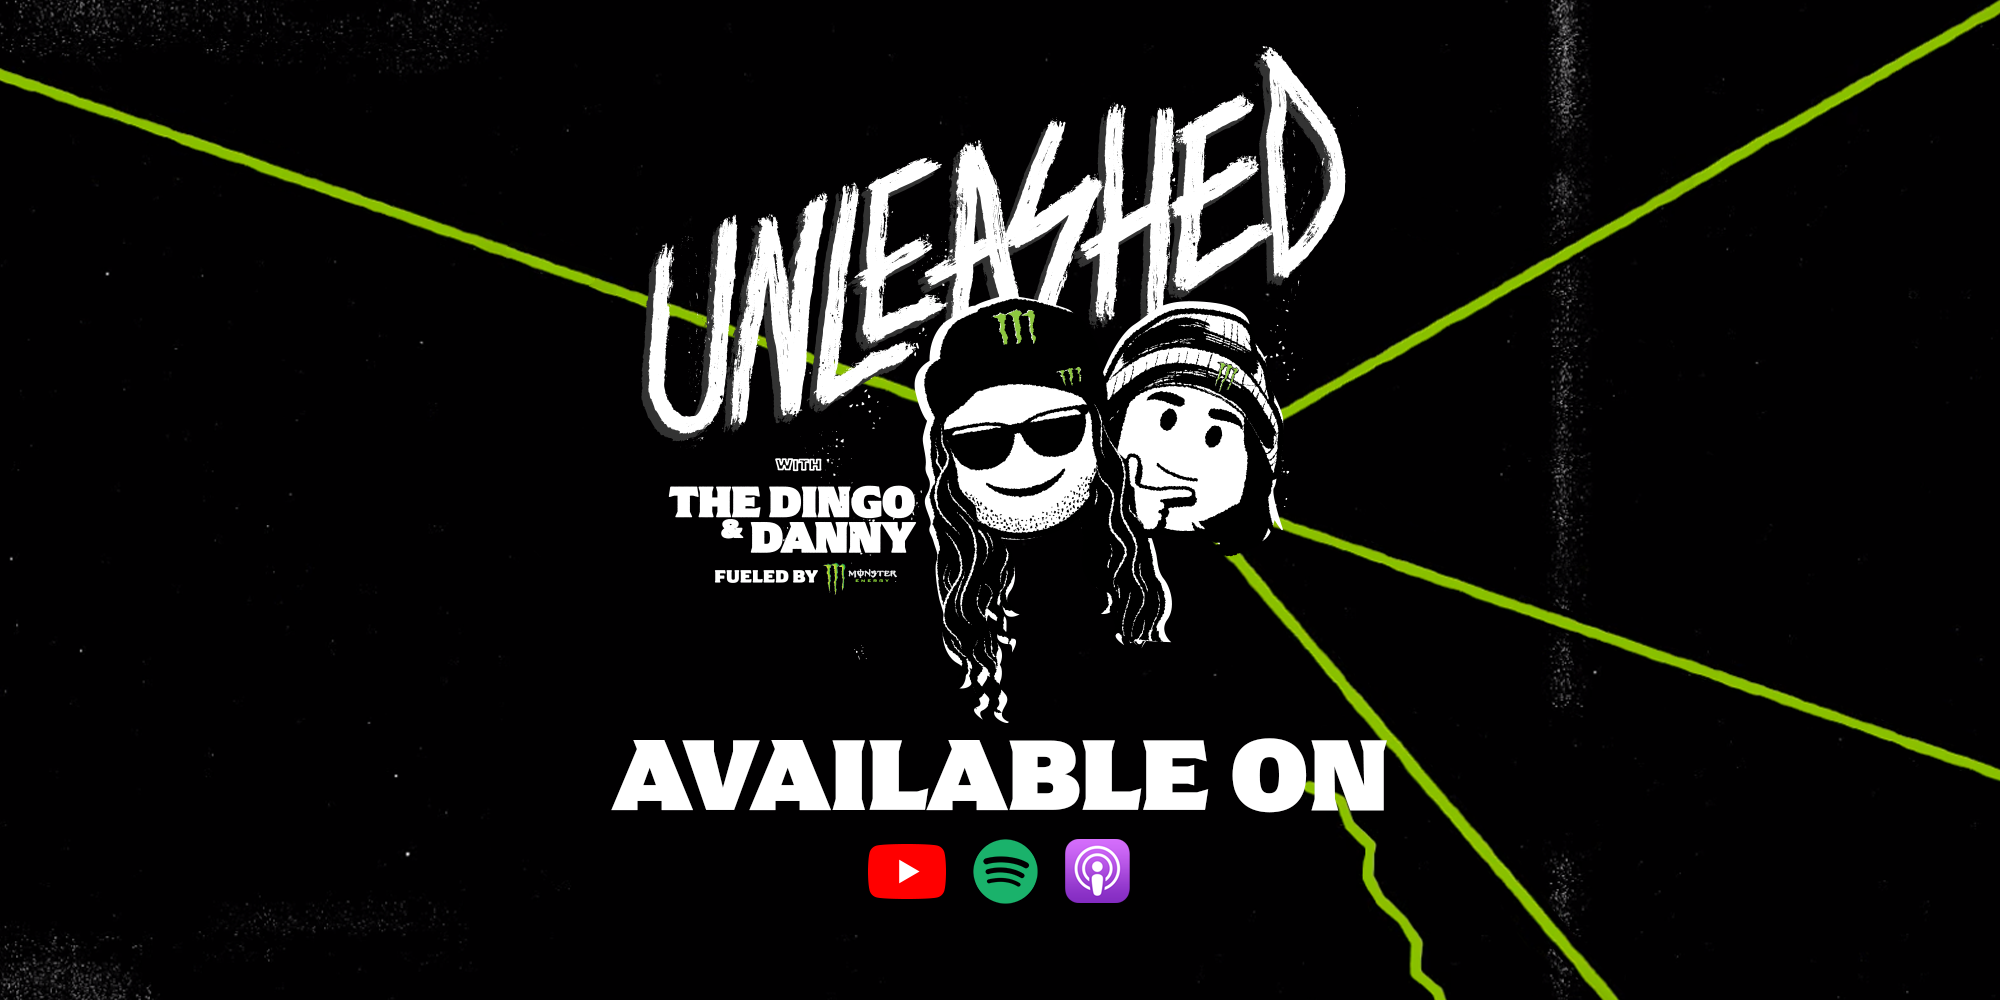 Monster Energy’s UNLEASHED With The Dingo and Danny is Available on all Platforms. Tune in to see Larry Edgar's EP17 Podcast.